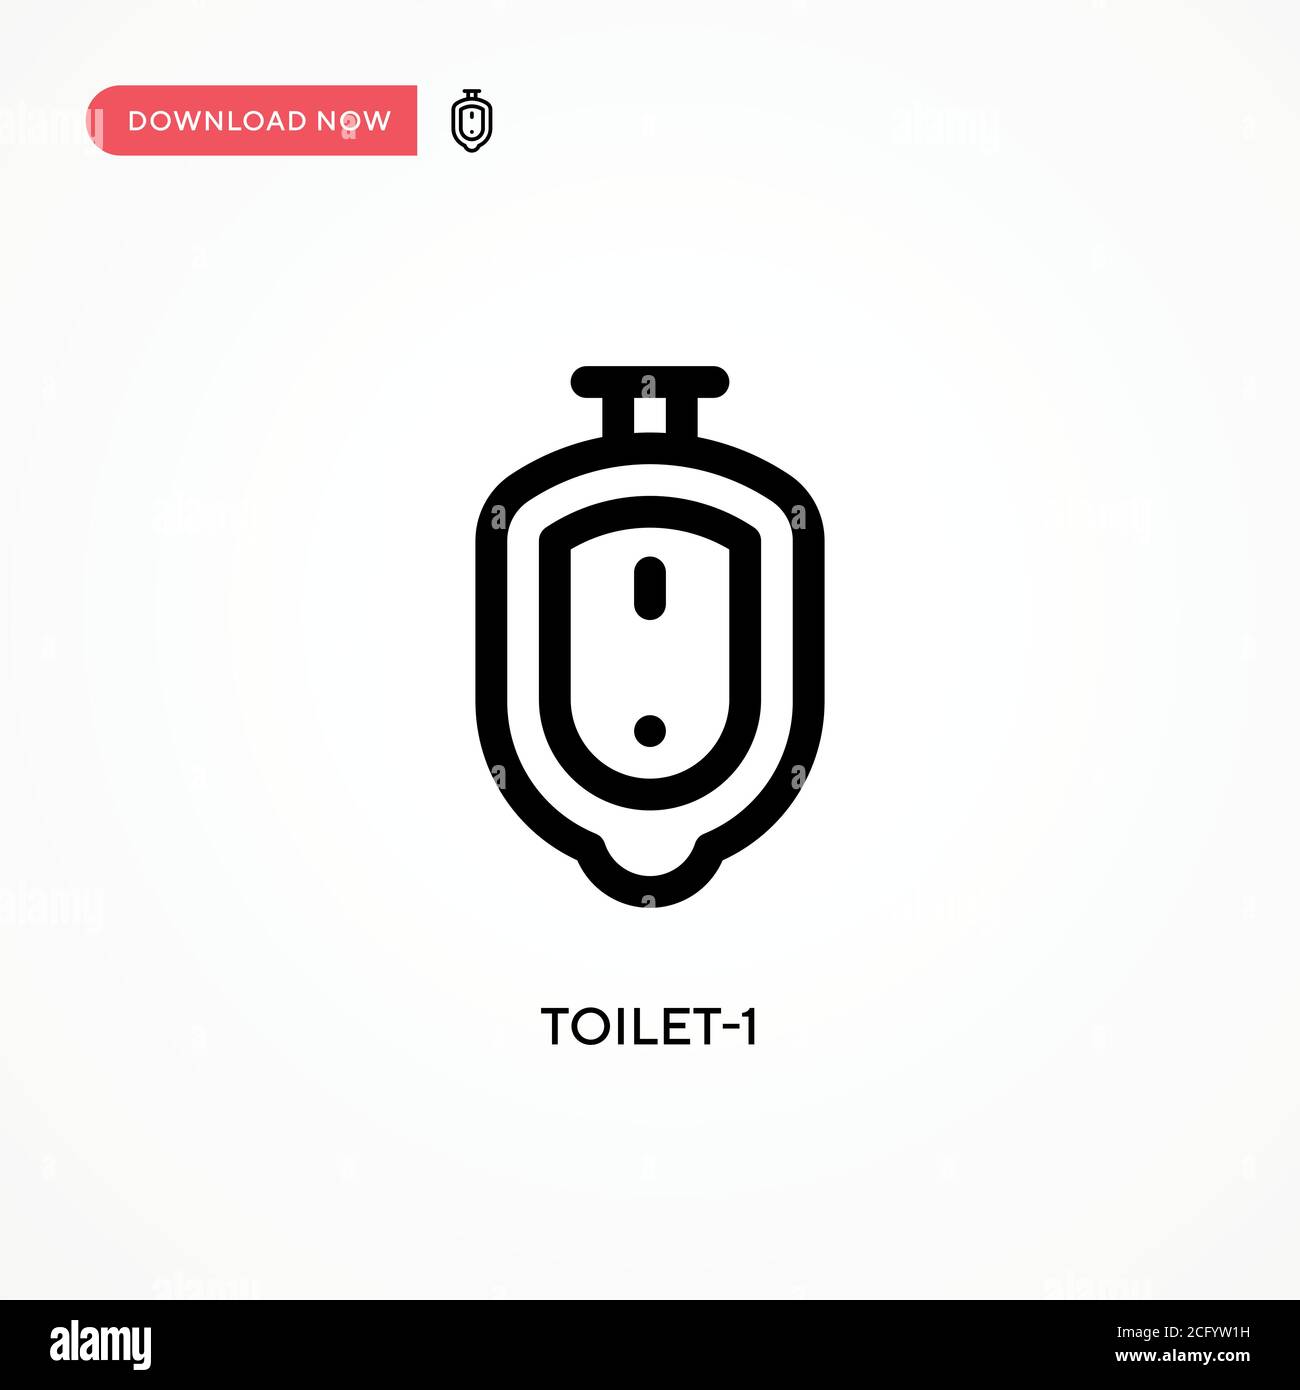 Toilet-1 Simple vector icon. Modern, simple flat vector illustration for web site or mobile app Stock Vector